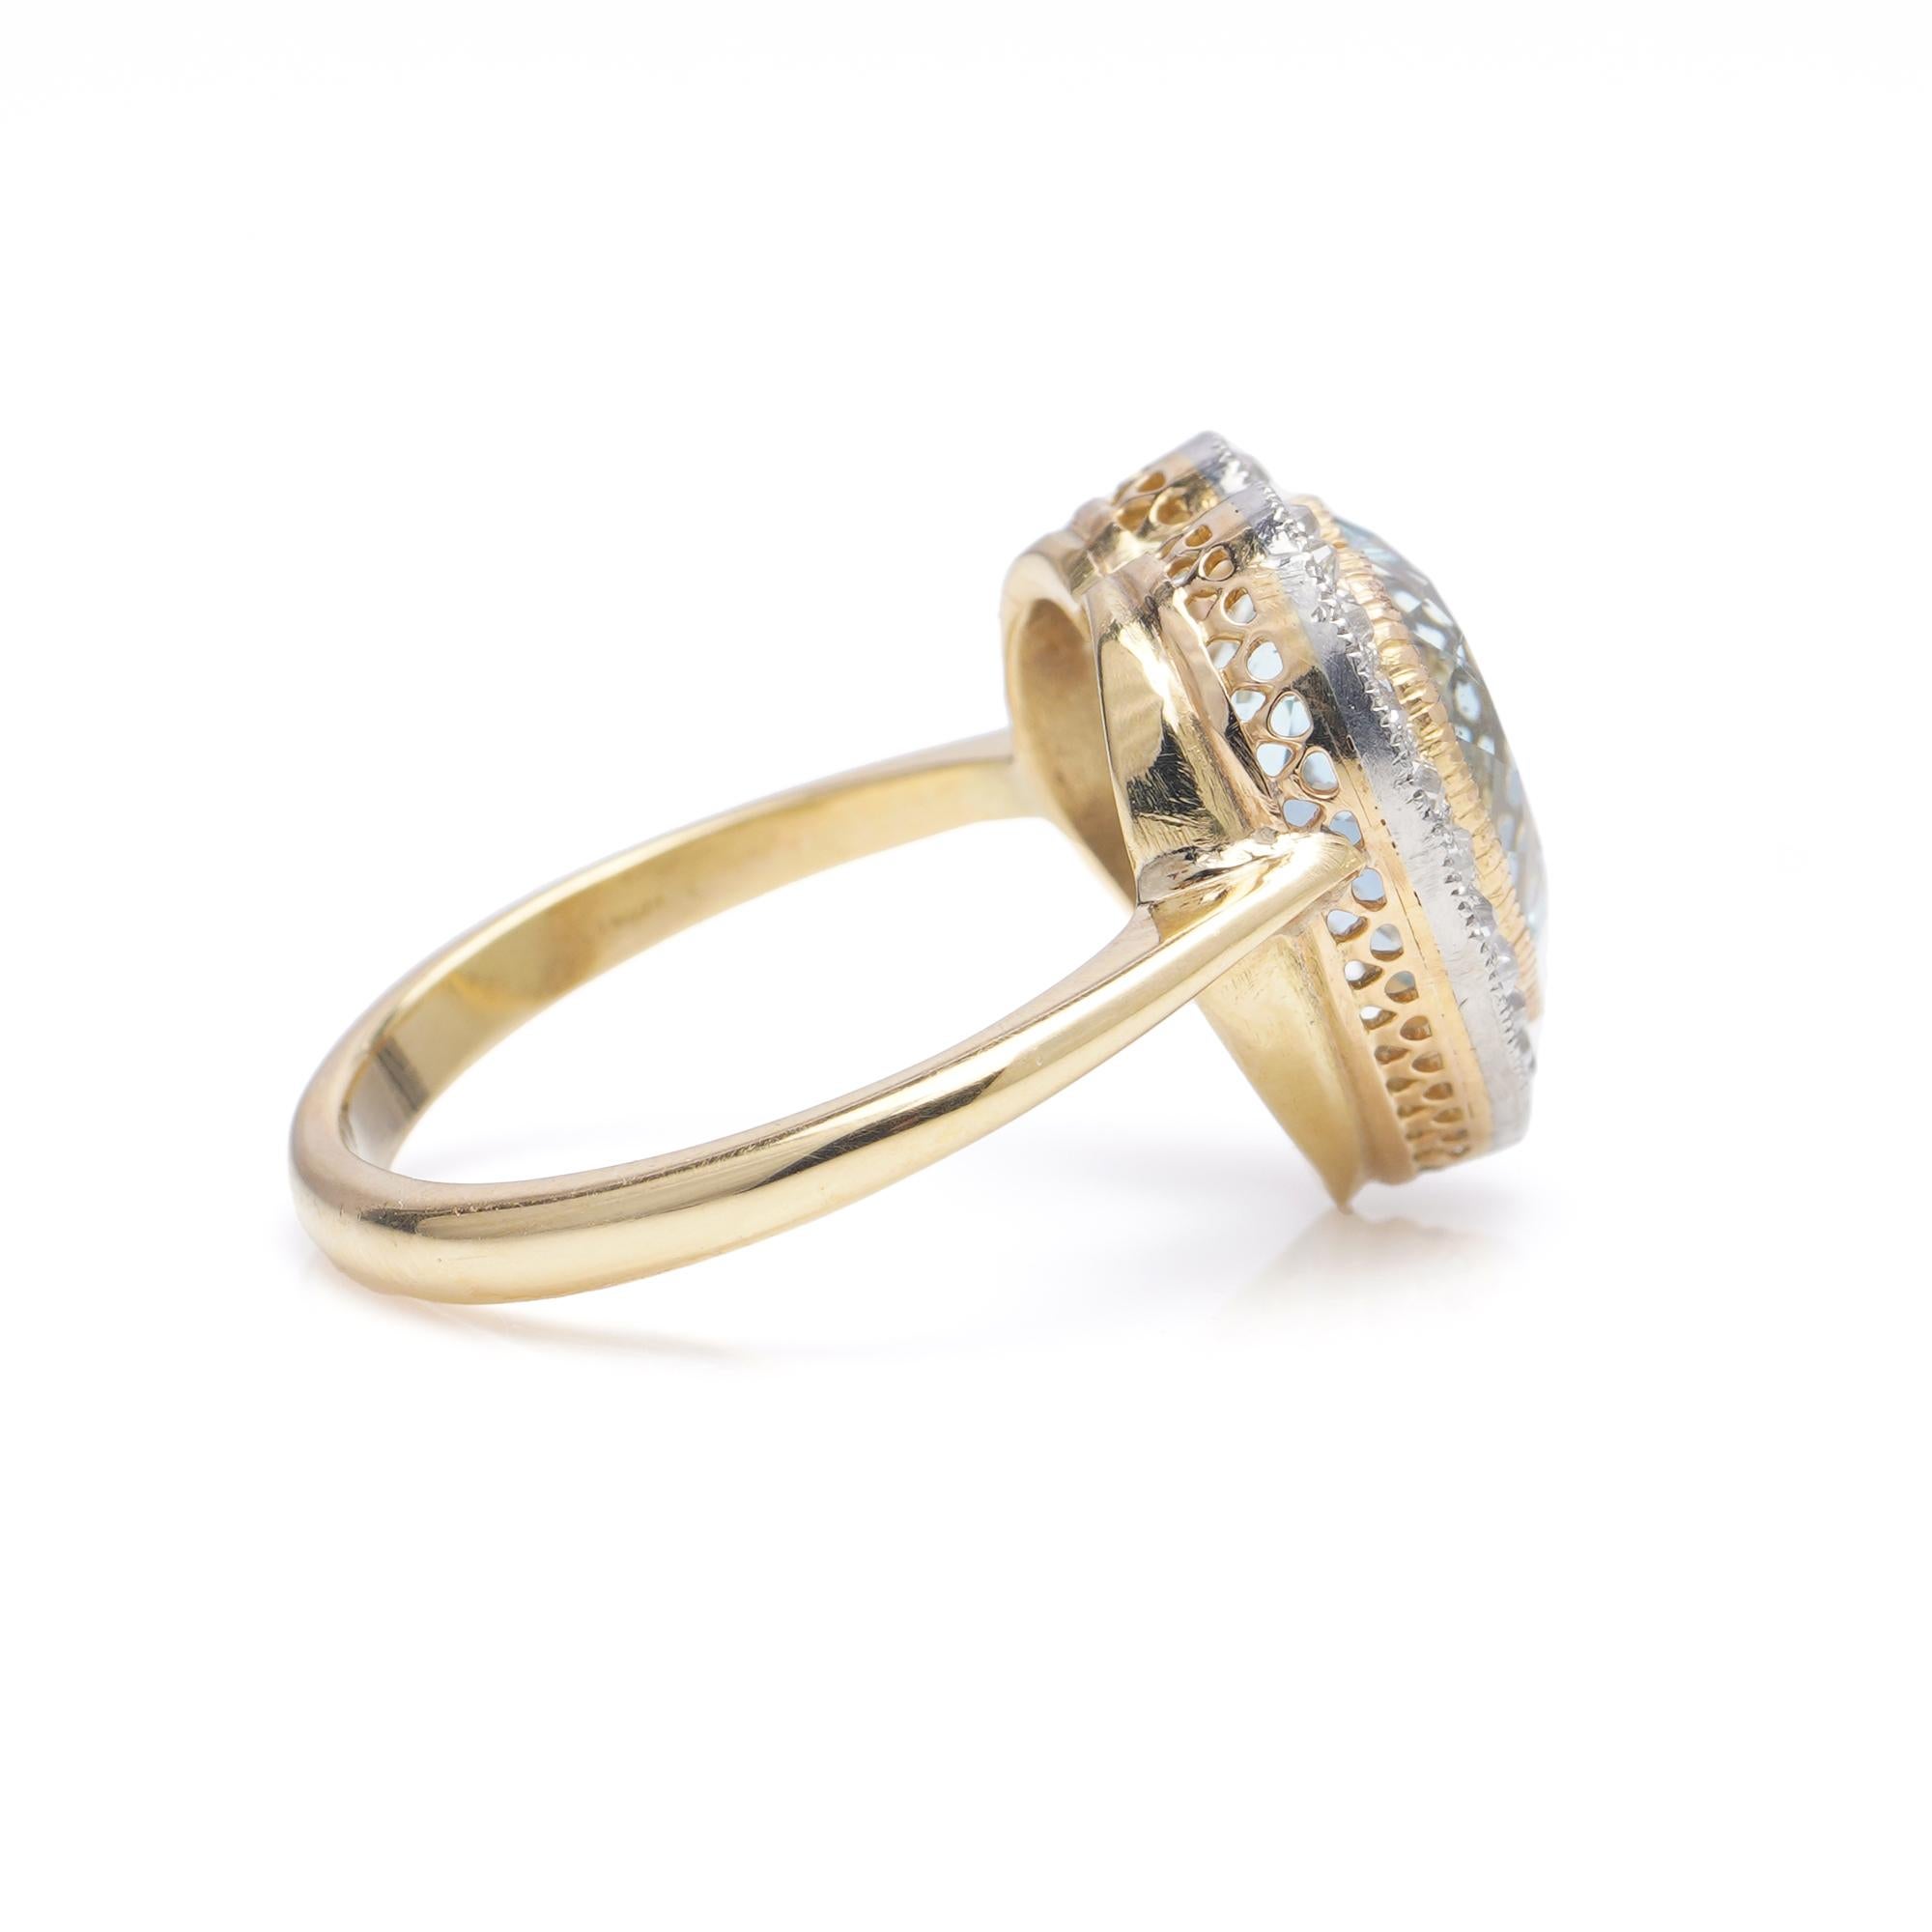 Women's or Men's Vintage 18kt Yellow Gold Ladies Ring with Heart Cut 6.00 Ct. Aquamarine For Sale